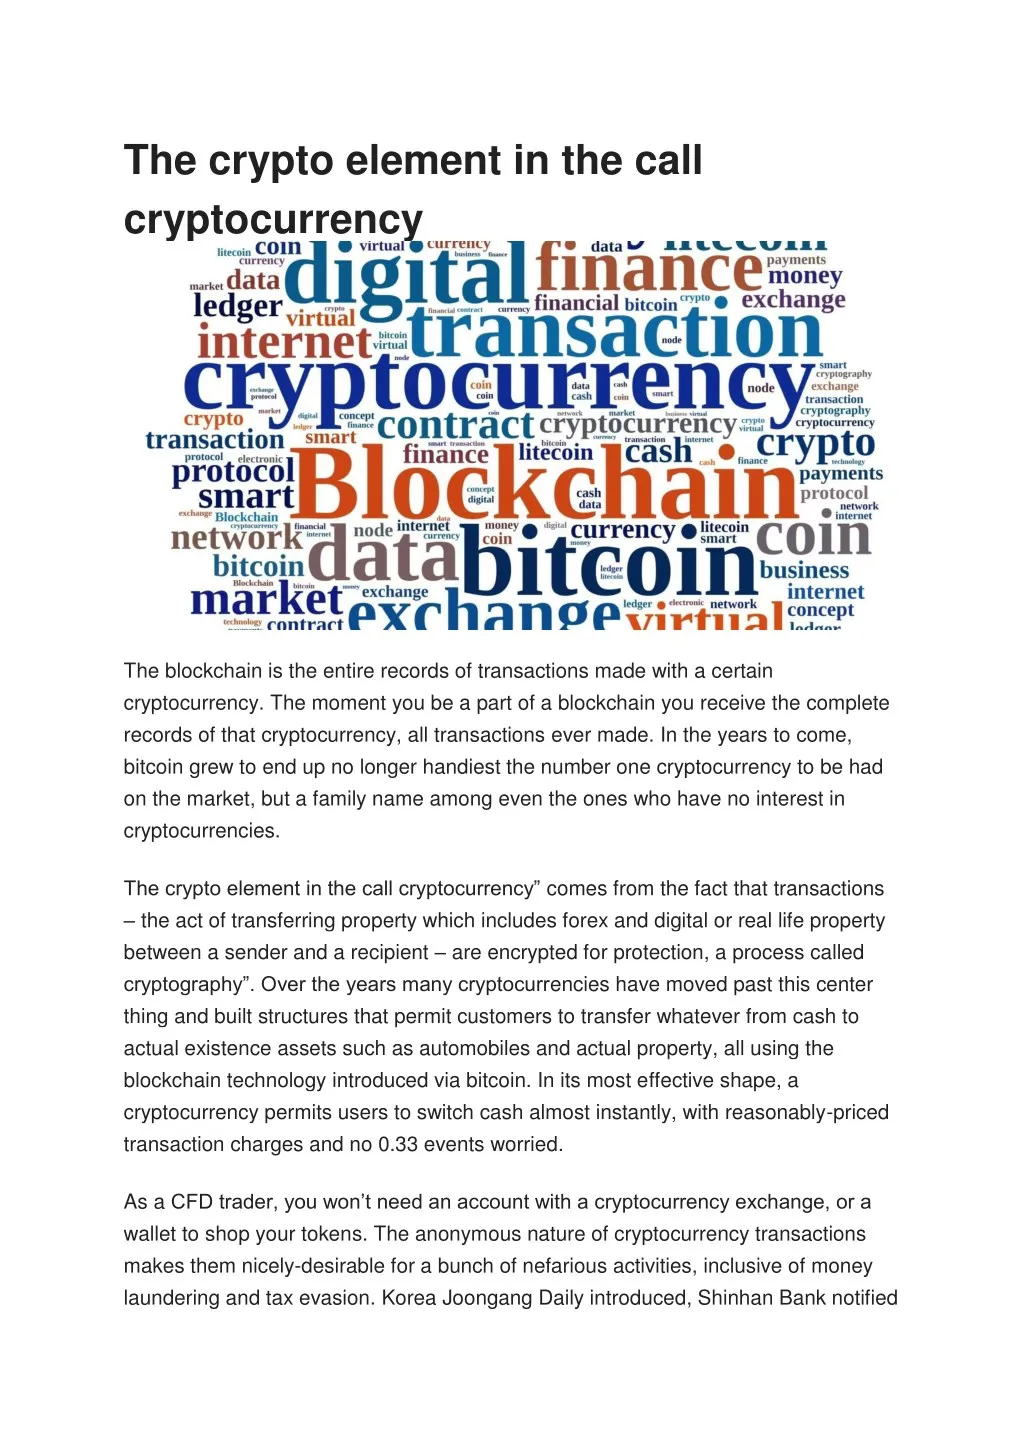 the crypto element in the call cryptocurrency